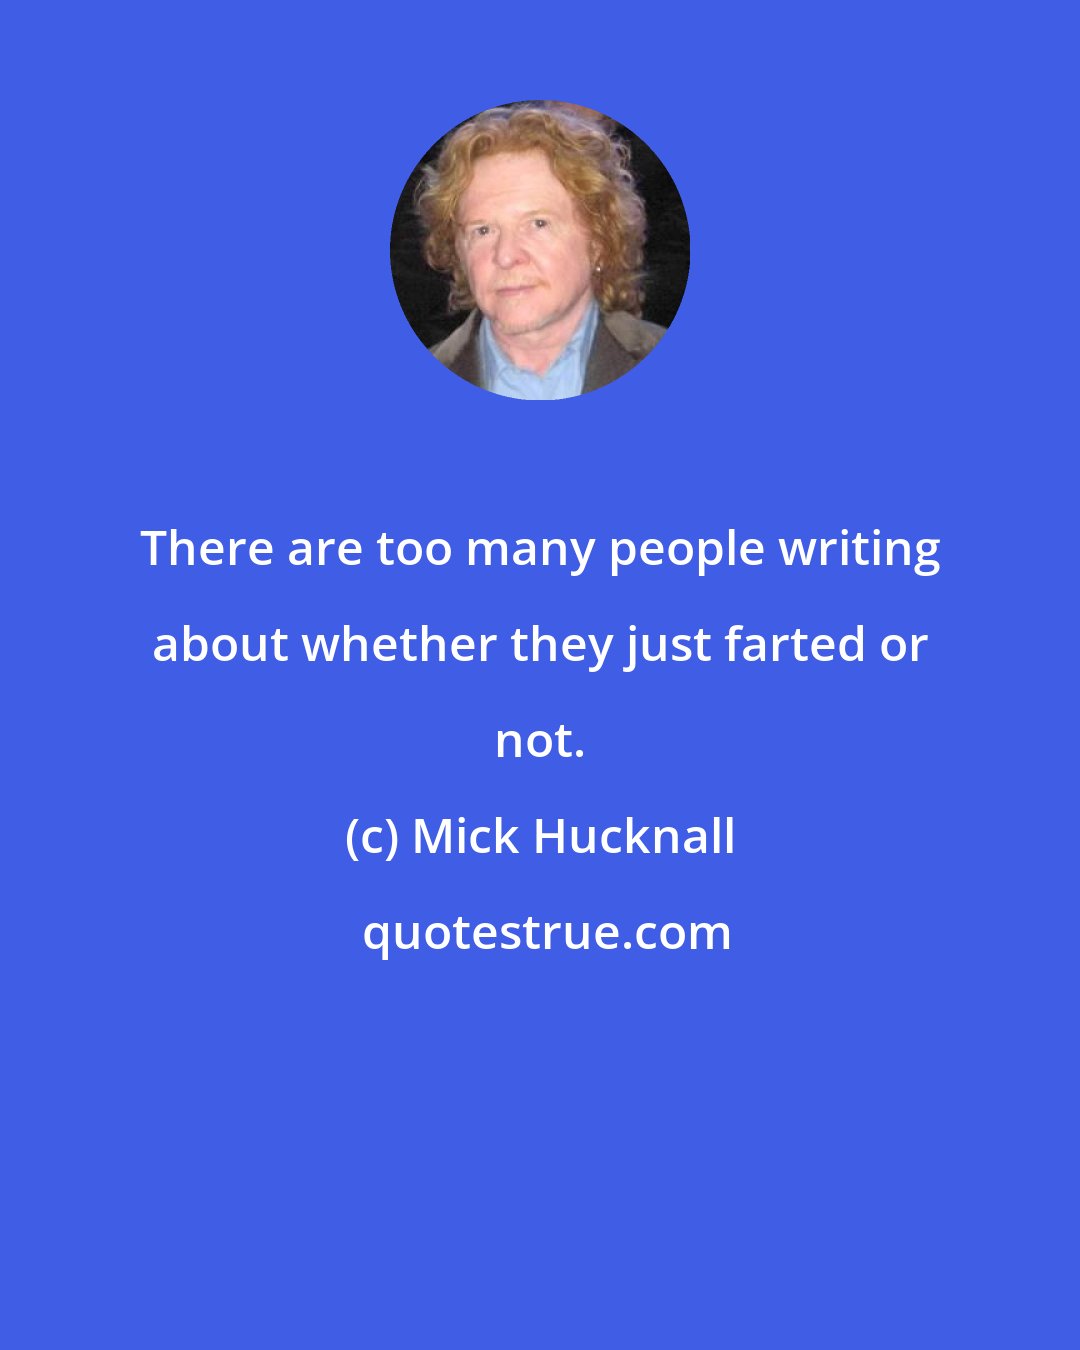 Mick Hucknall: There are too many people writing about whether they just farted or not.